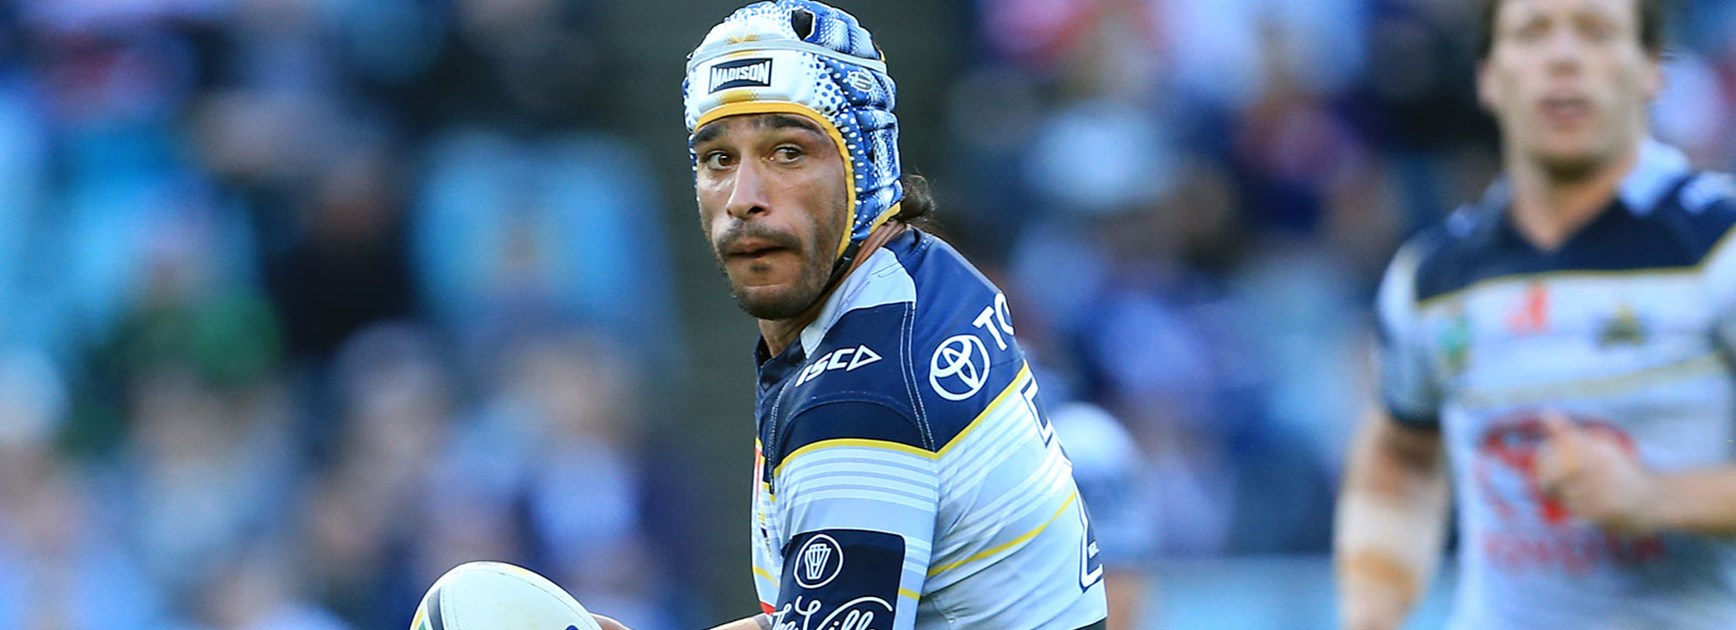 Cowboys halfback Johnathan Thurston has been stifled in attack in recent weeks.